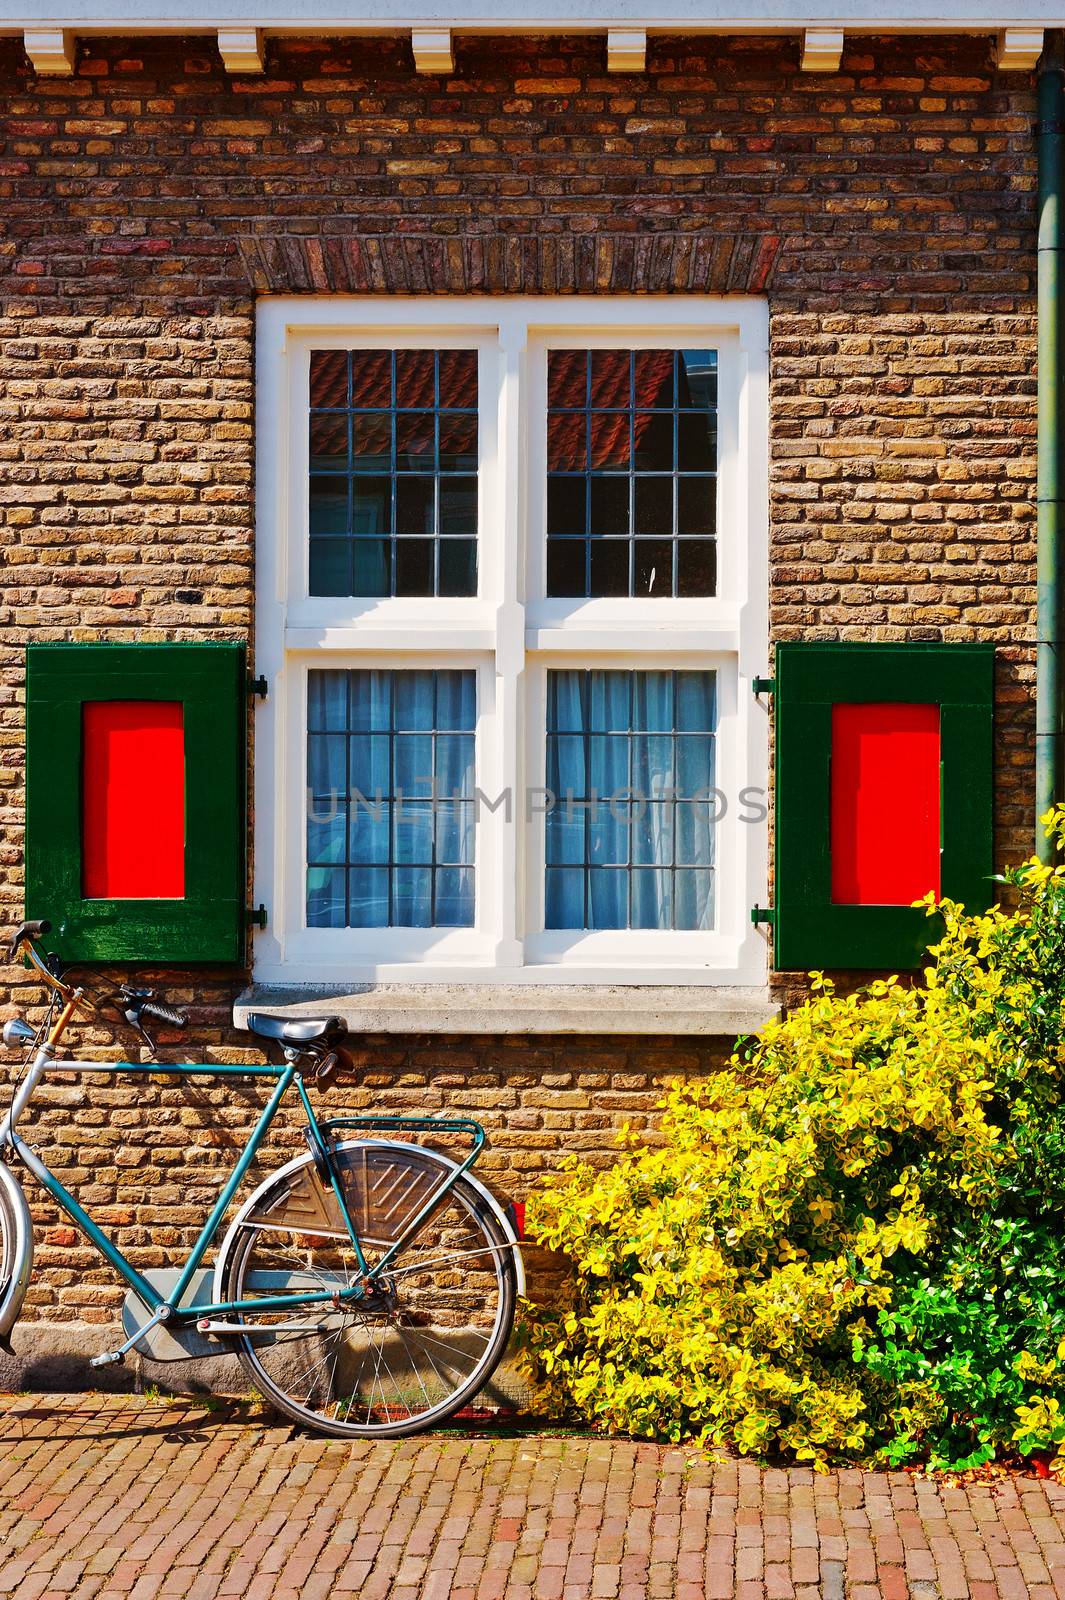 Window with Red Shutters in the Dutch City